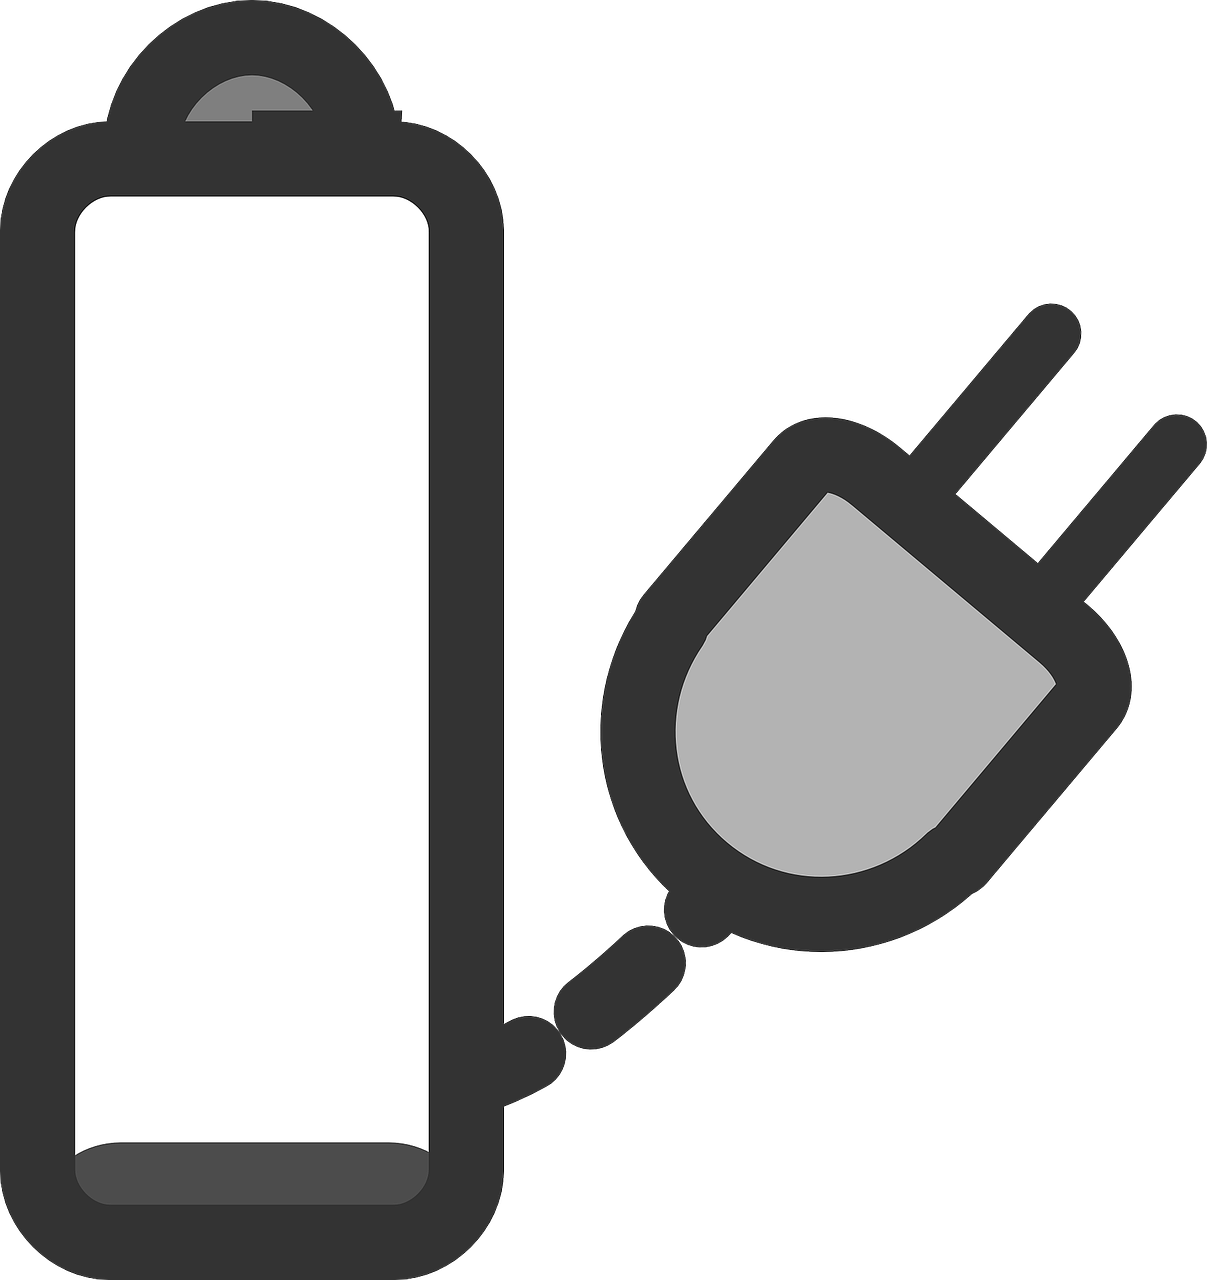 charger charge symbol free photo